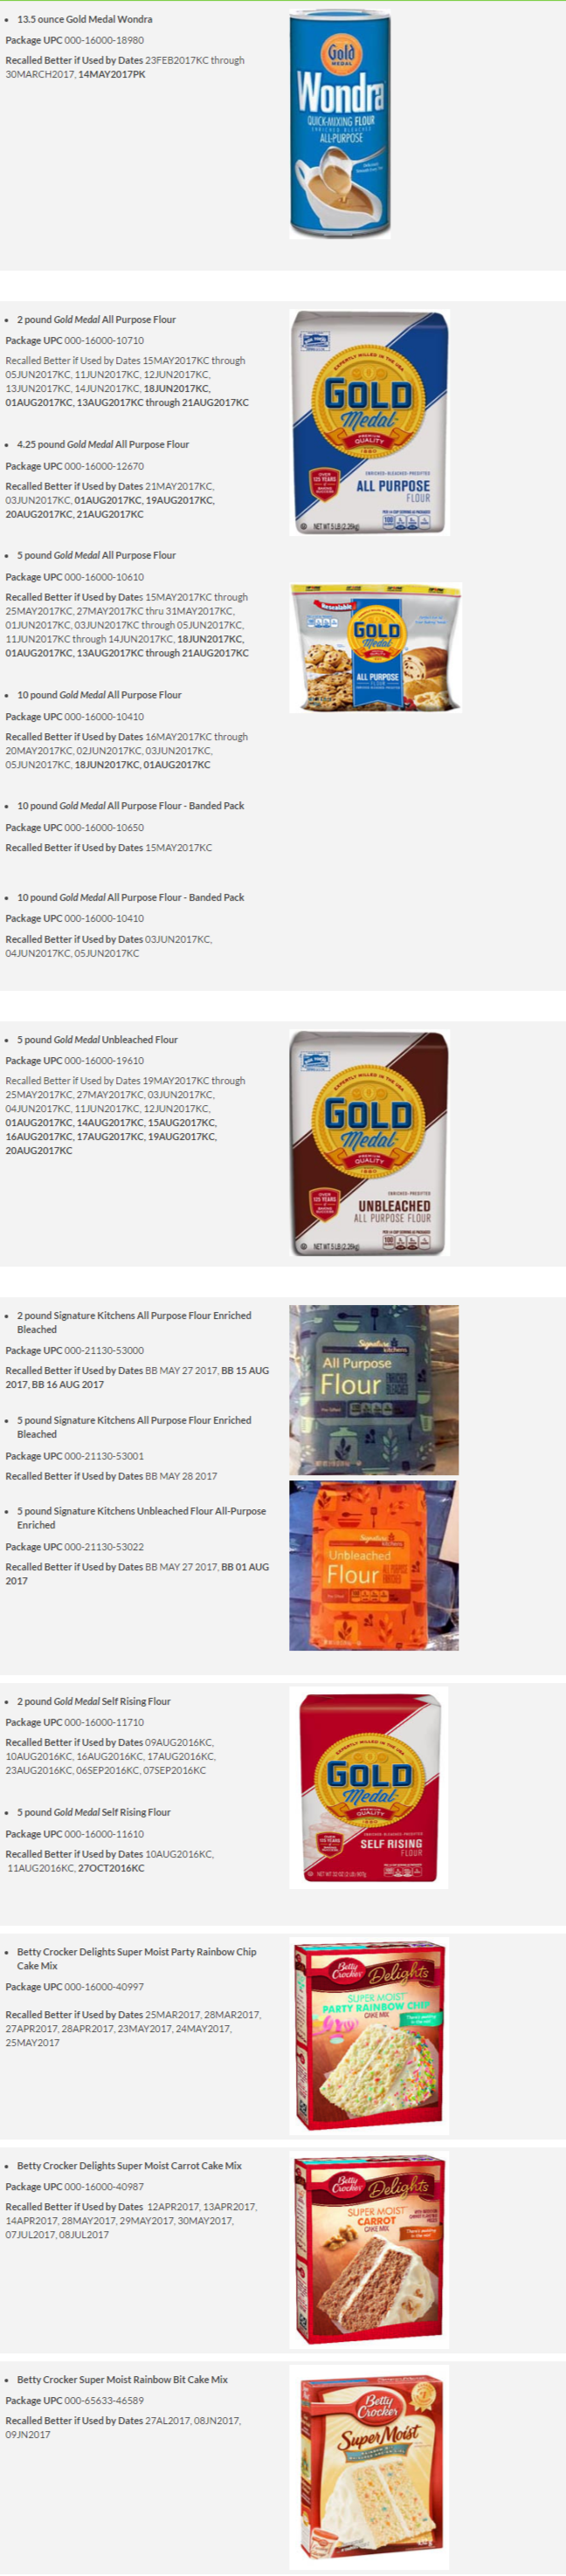 image-general-mills-flour-recall-products